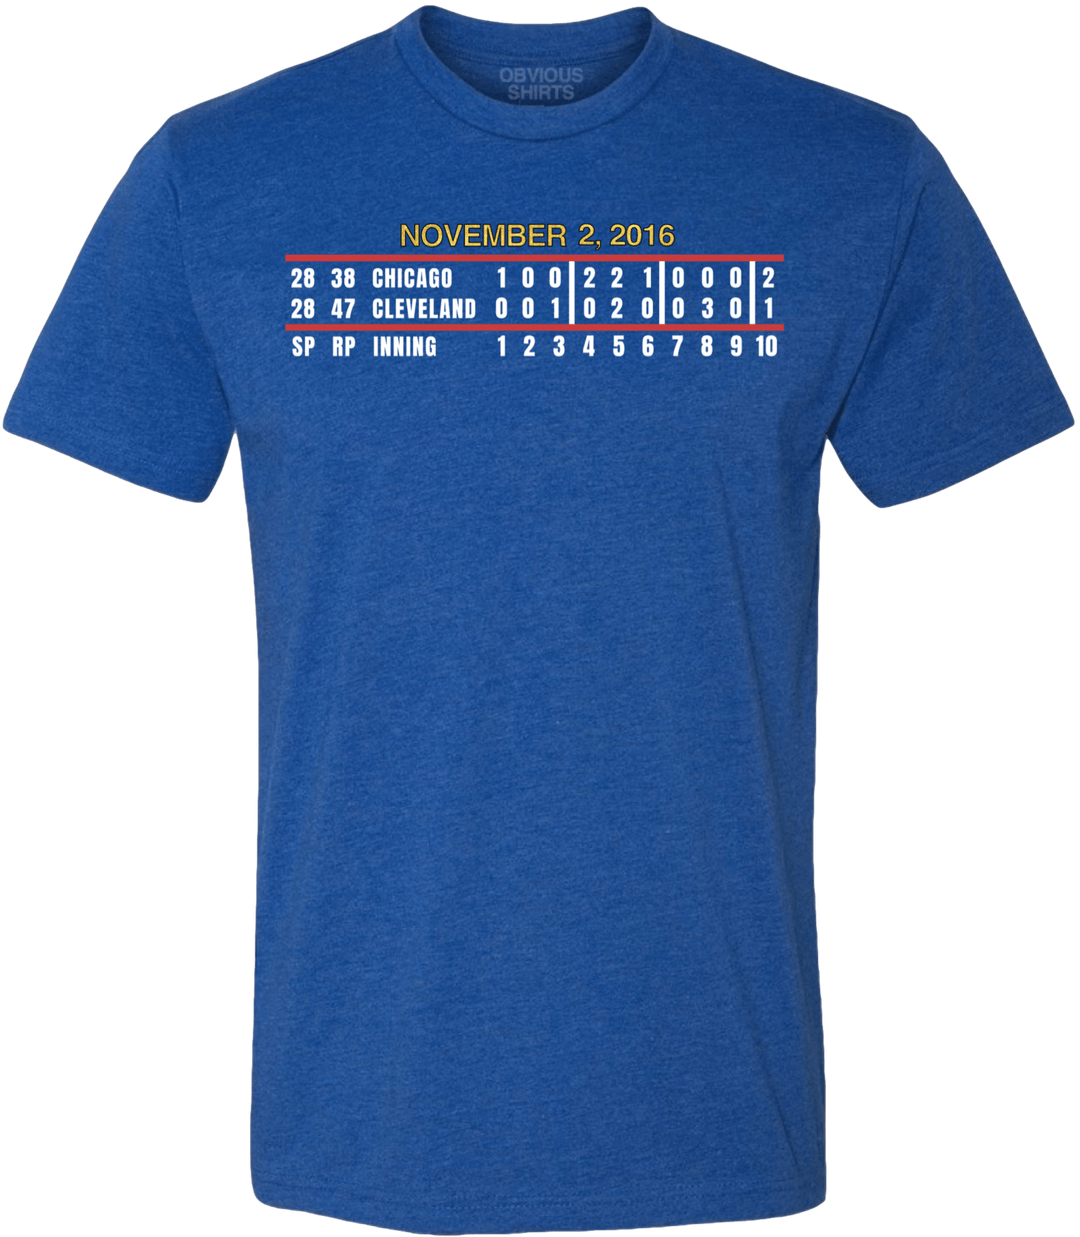 GAME 7 SCOREBOARD. (ANNIVERSARY EDITION) - OBVIOUS SHIRTS